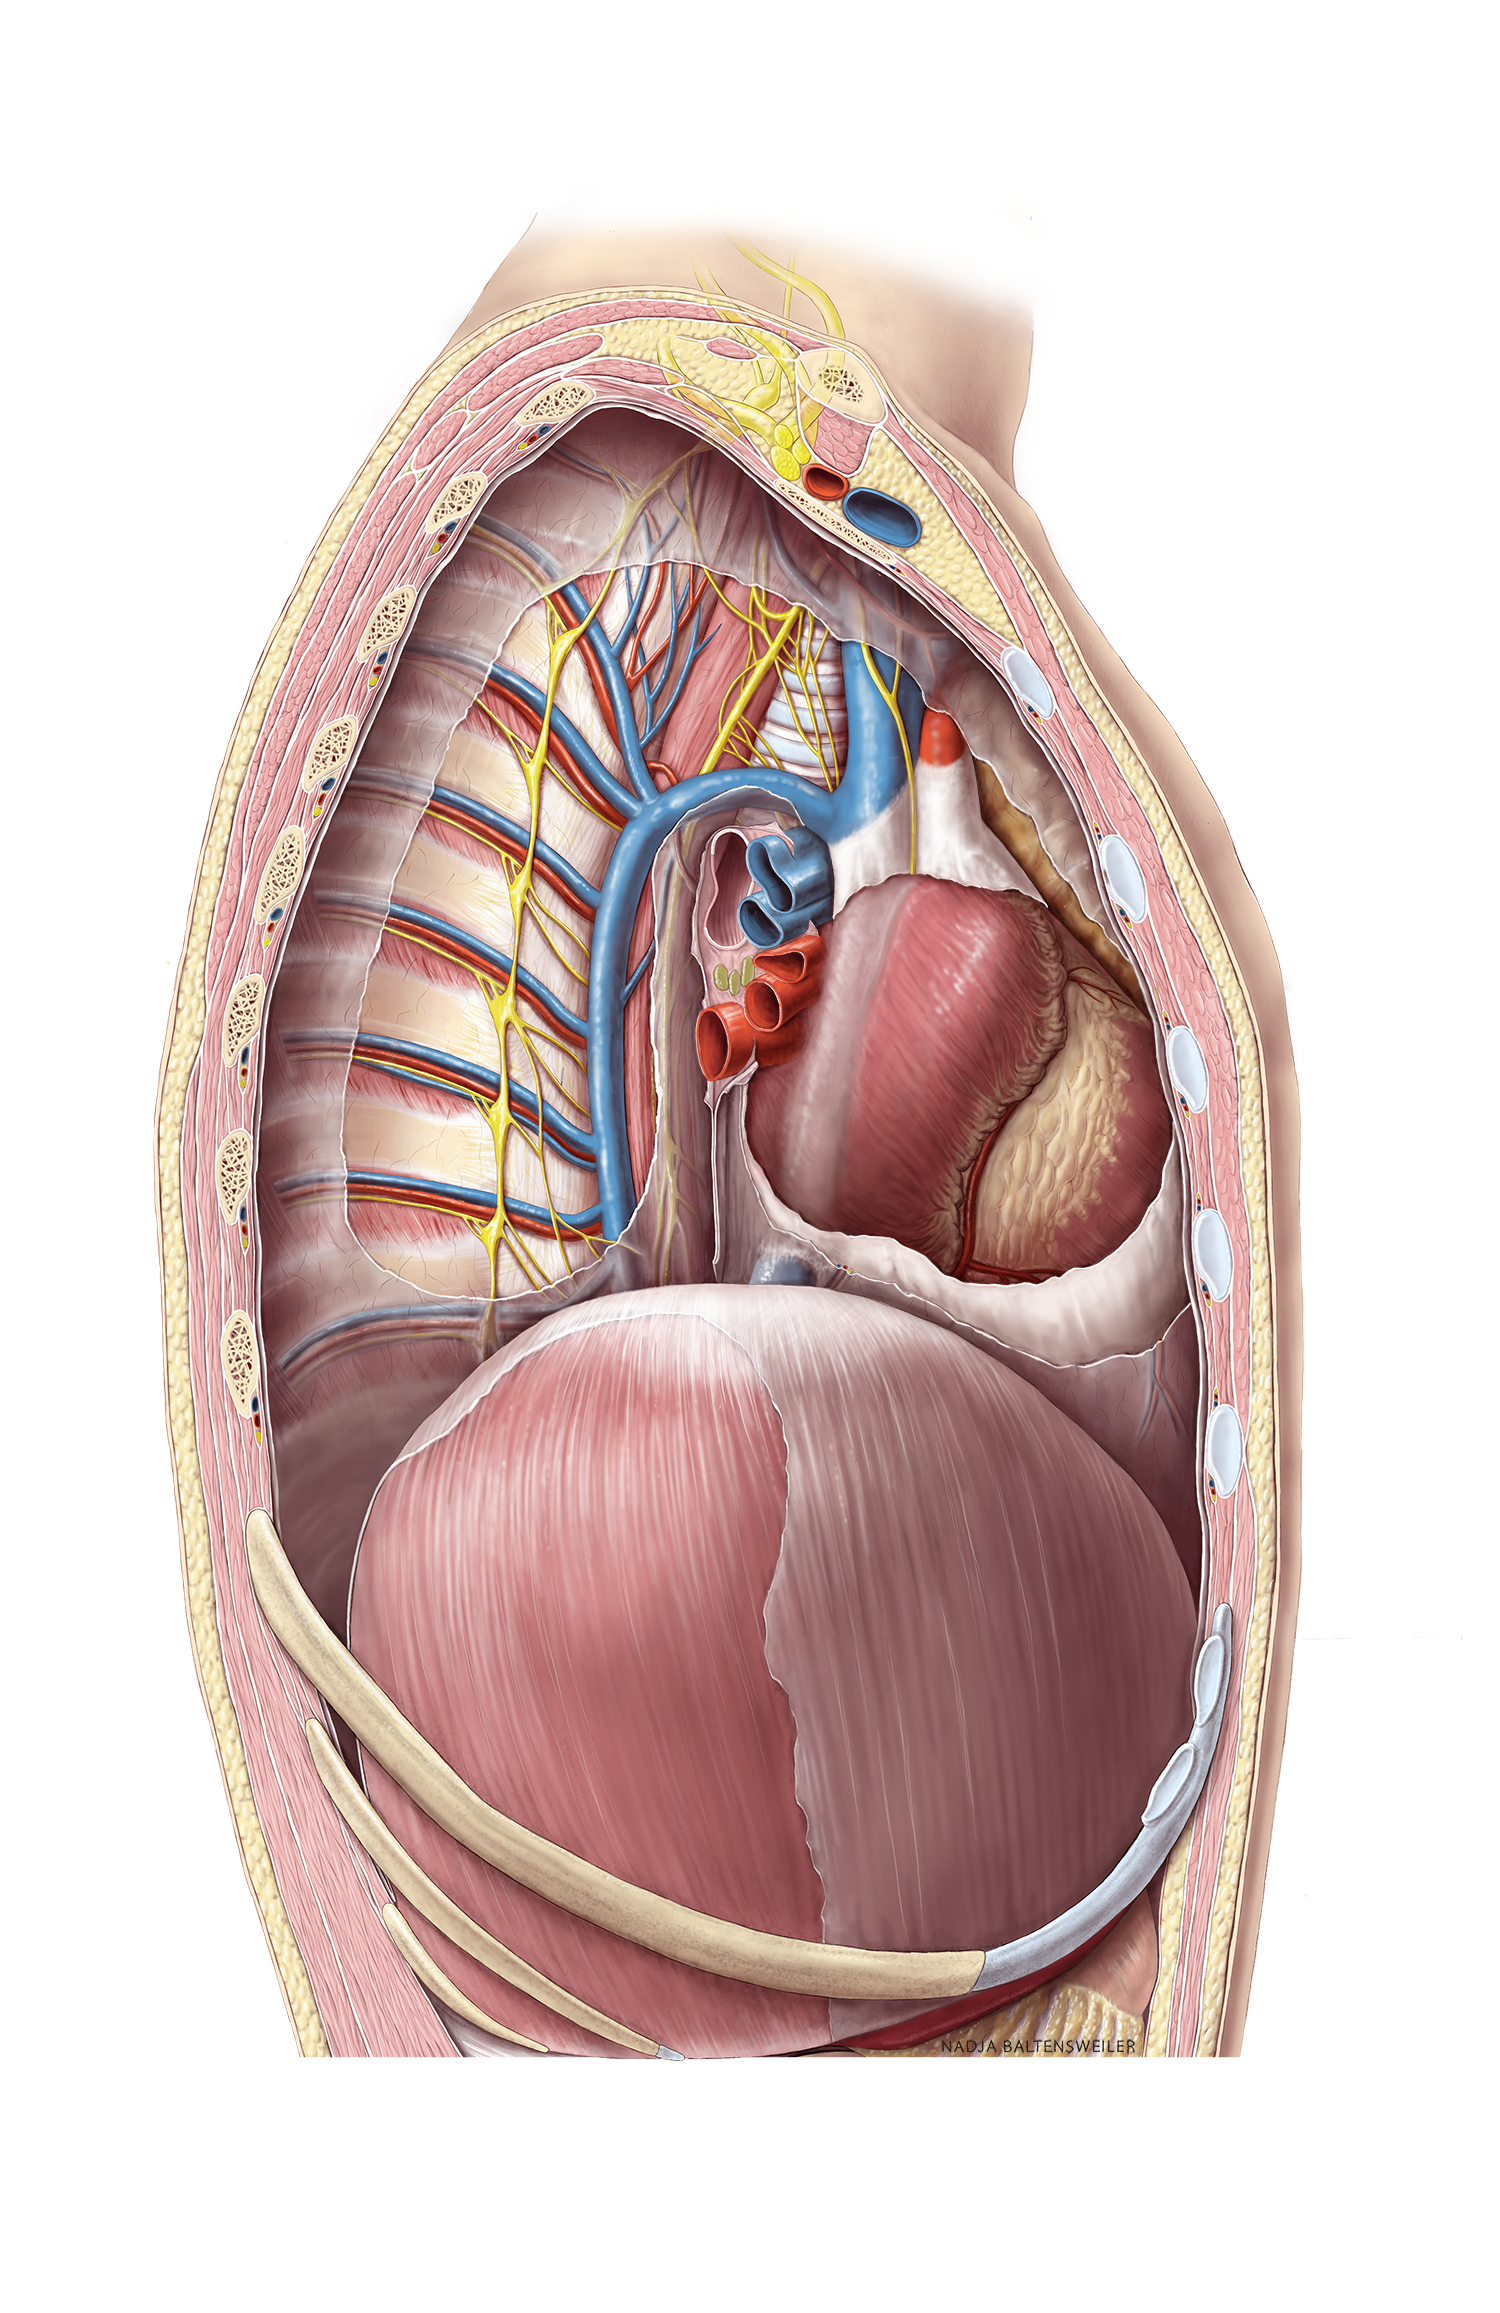 Lateral view of opened thorax, lung removed. View from right on mediastinum. Pericardium opened. Open Anatomy Atlas illustration by Nadja Baltensweiler, scientific illustrator. Credit as follows upon reuse: anatomytool.org/content/lateral-view-opened-thorax-lung-removed By: www.nadjabaltensweiler.ch & www.anatomen.nl, license: CC BY NC SA 4.0